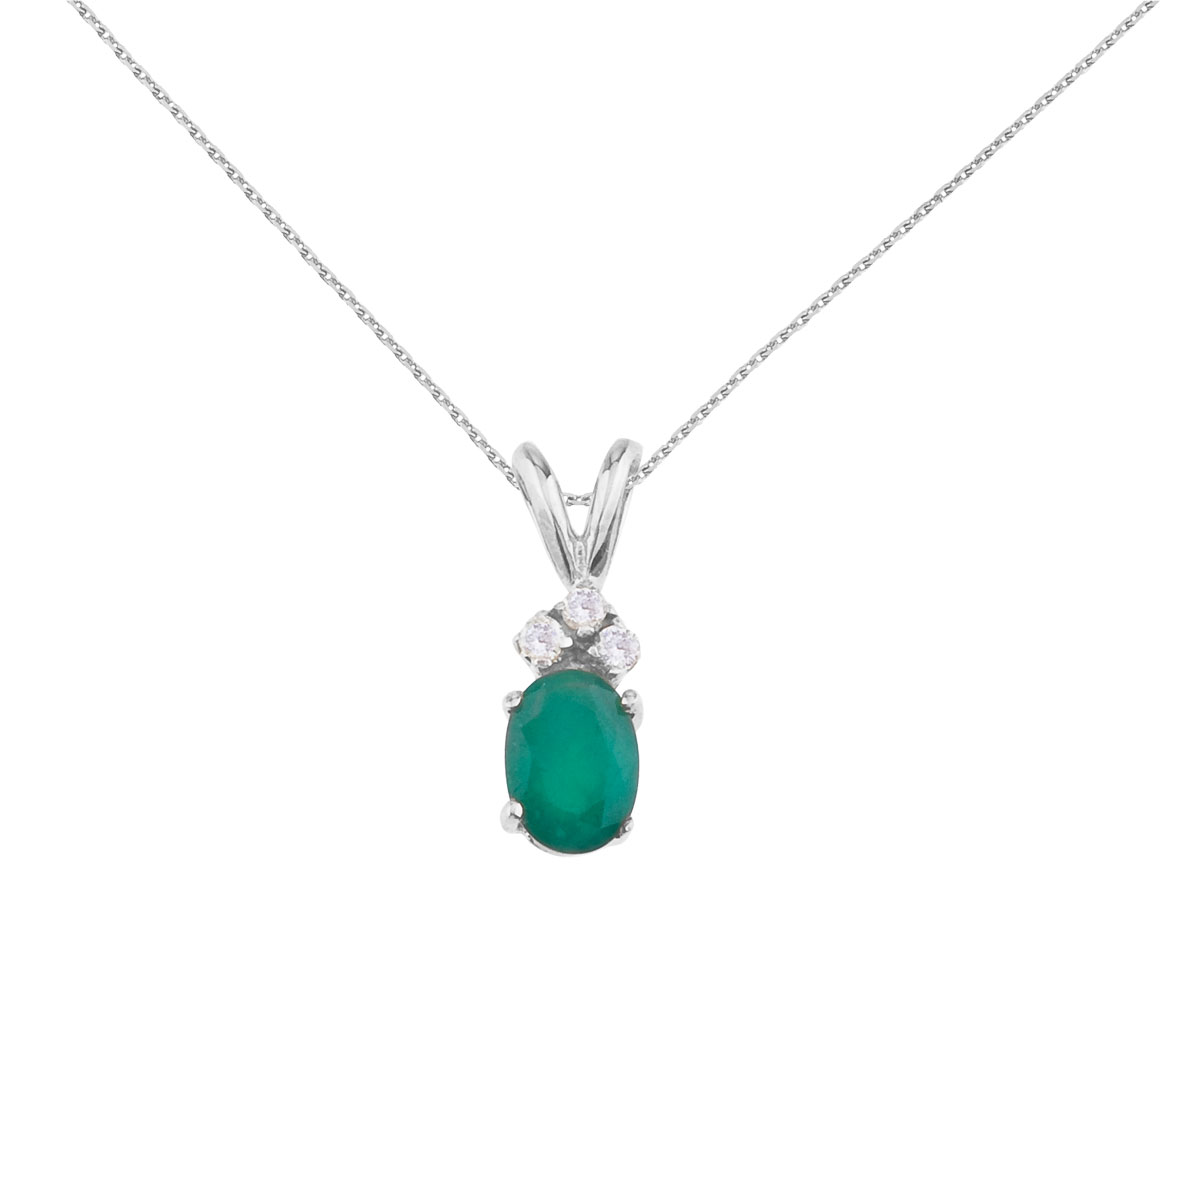 JCX2696: 7x5 mm oval natural emerald pendant topped with 3 bright diamonds set in 14k white gold.